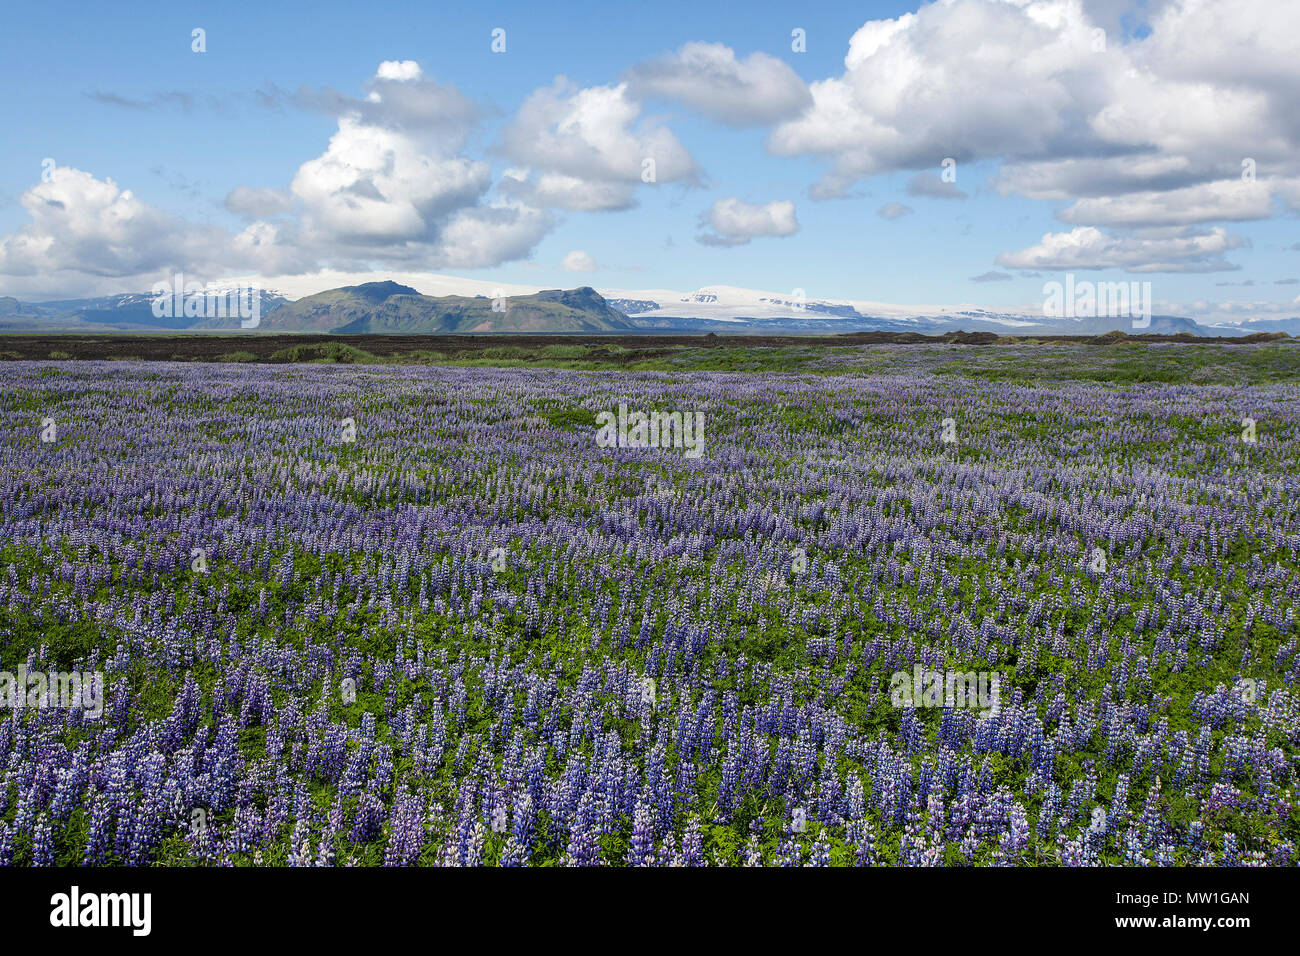 Wide landscape with Nootka lupins (Lupinus nootkatensis), at the back volcano Katla, cloudy sky, near Vik, South Iceland Stock Photo